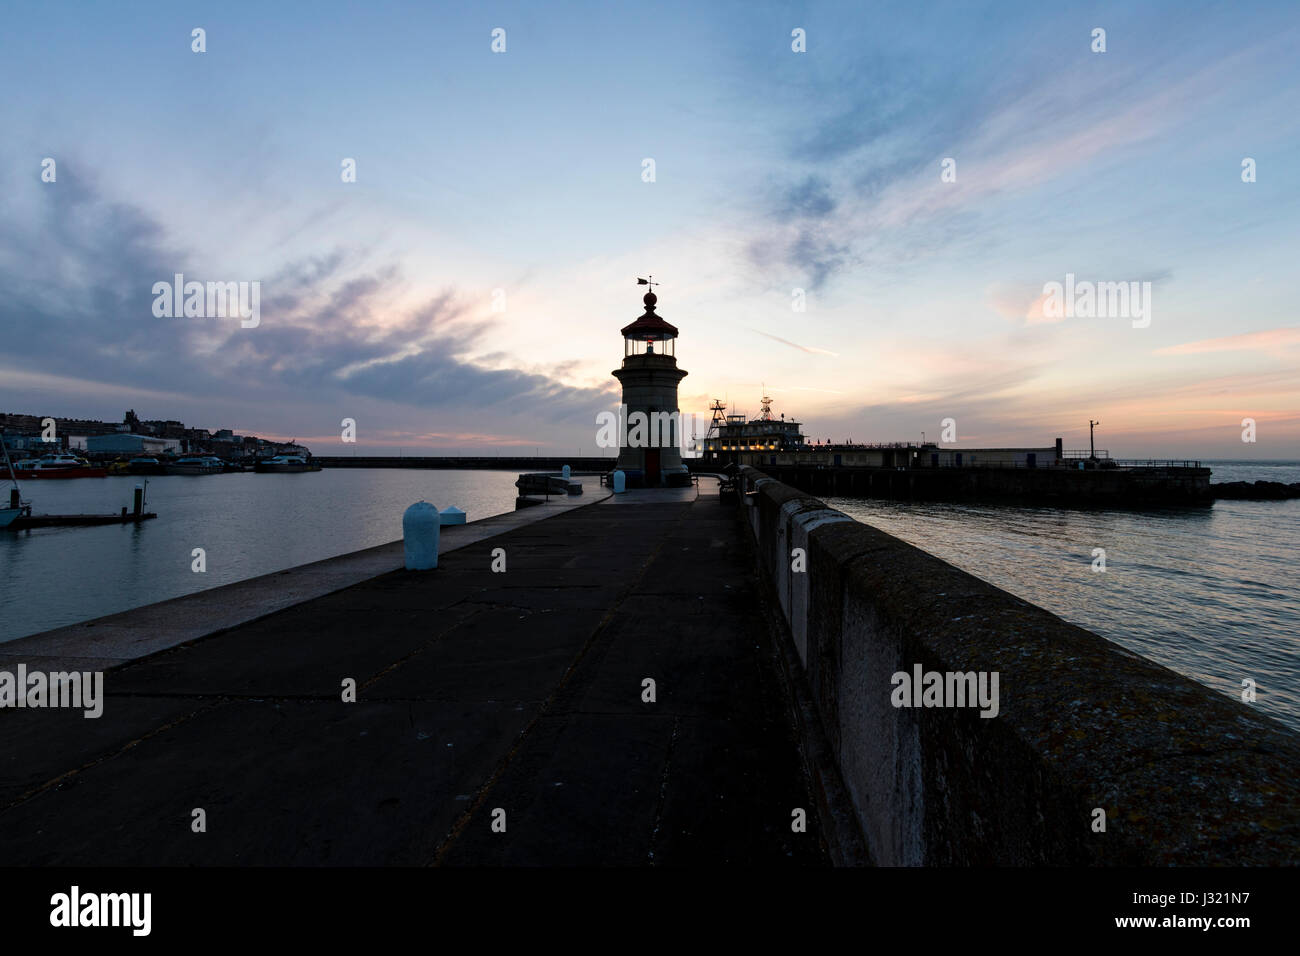 England, Ramsgate harbour. Dawn sky with silhouette lighthouse at end of harbour jetty, and in the background, the harbour offices on other harbour jetty. Sky with cloud layer, sunrise hidden. Stock Photo